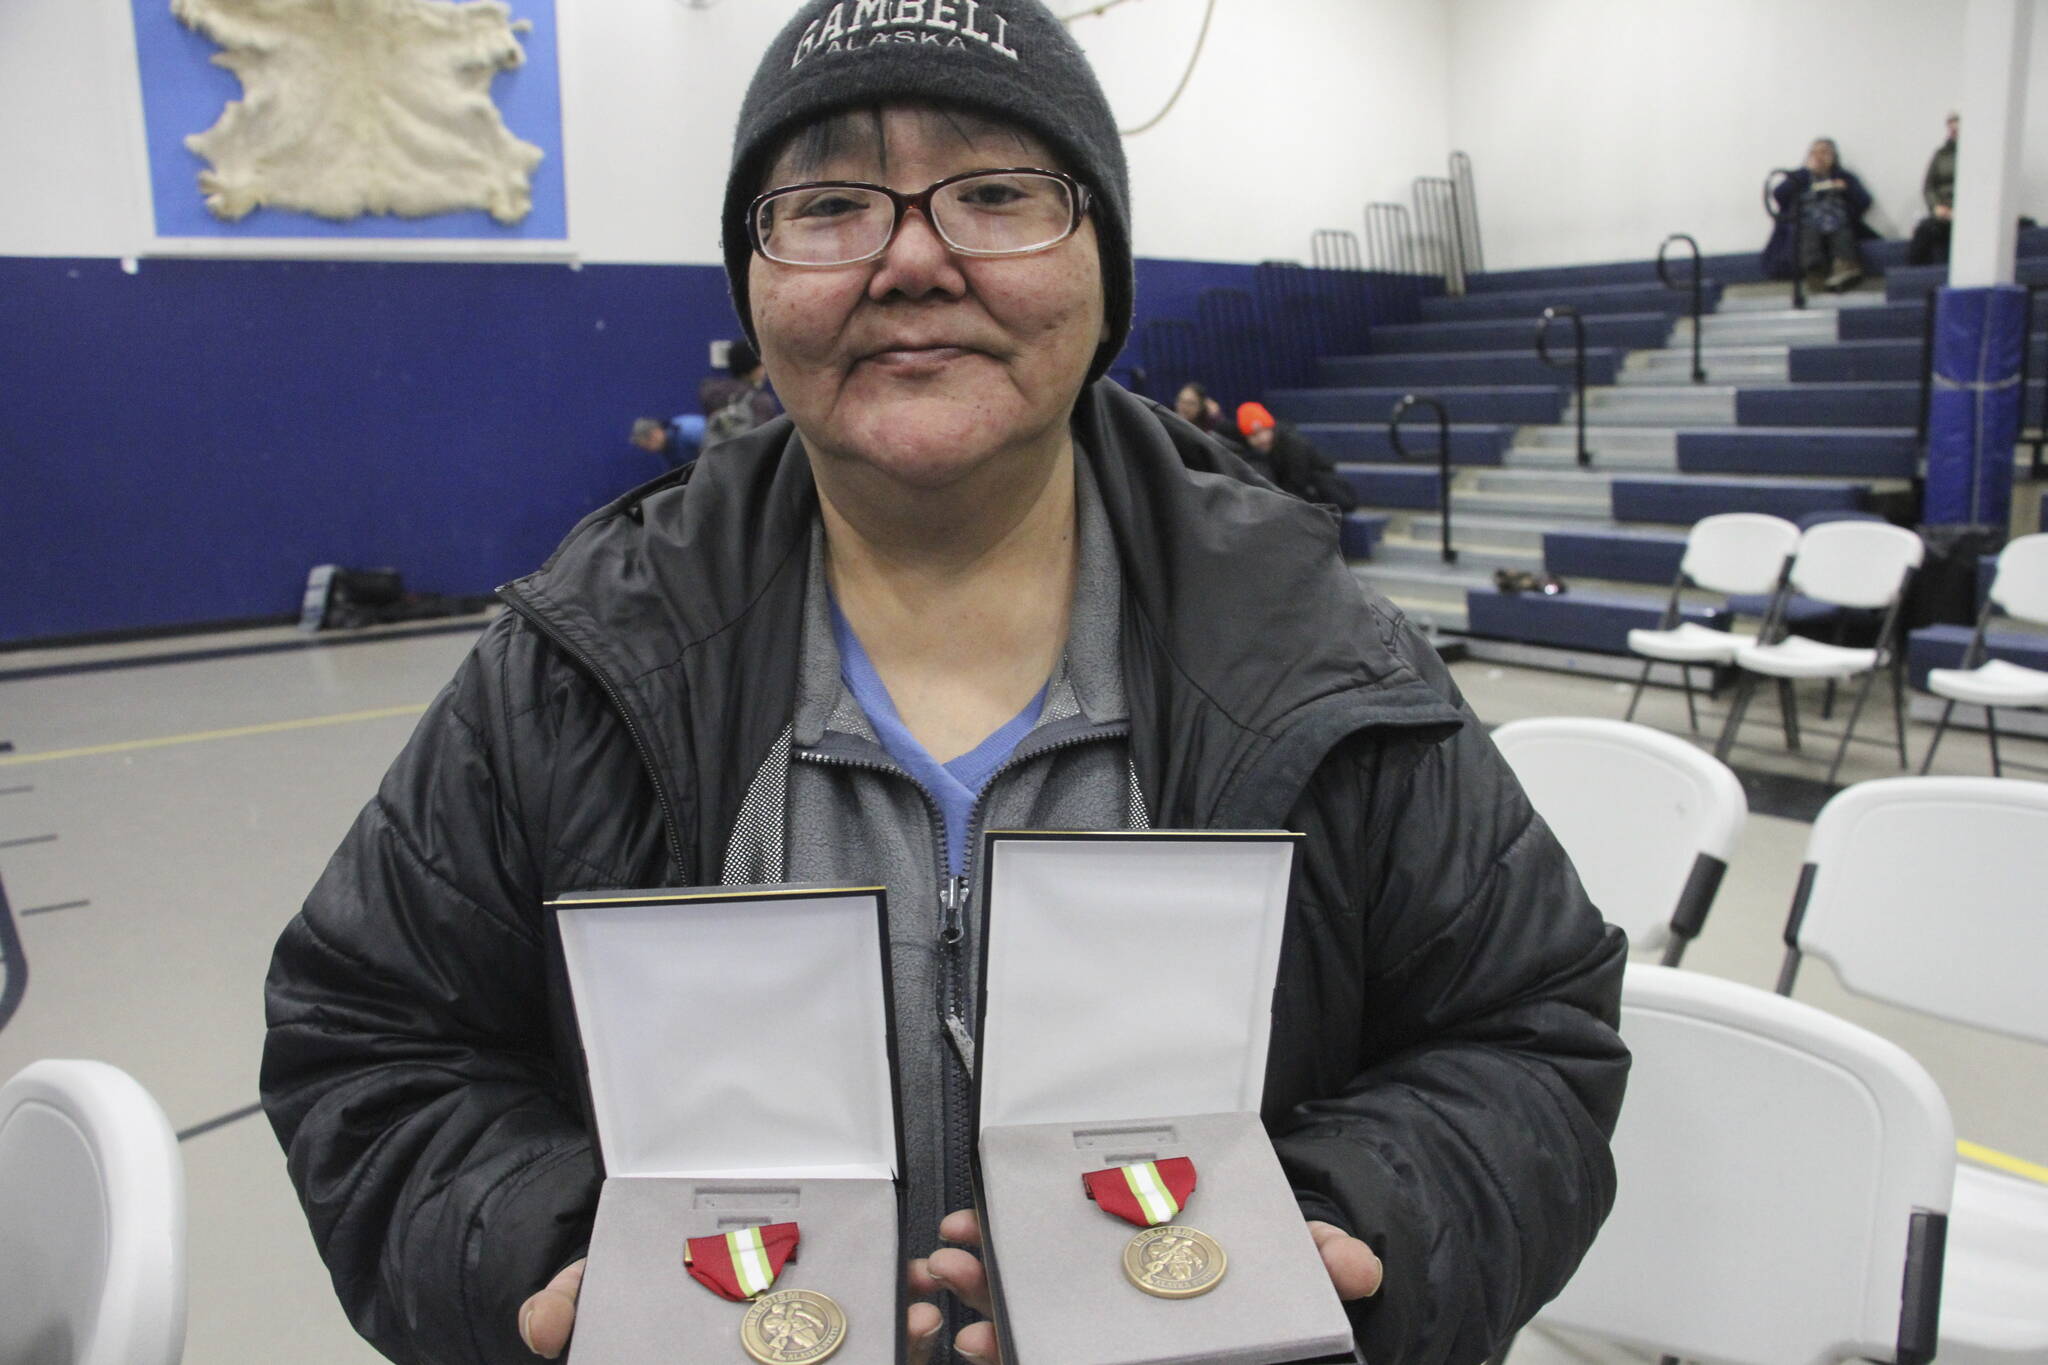 This March 28, 2023, photo shows JoAnn Kulukhon posing with two Alaska Heroism Medals presented posthumously to her uncles, Pvts. Luke and Leroy Kulukhon, during a ceremony in Gambell, Alaska. Sixteen Alaska National Guard members were honored for helping rescue the 11 crewmembers of a Navy plane that was shot down in 1955 by Soviet jet fighters and crash-landed about 8 miles from Gambell, on St. Lawrence Island, and 15 medals were presented posthumously. (AP Photo / Mark Thiessen)